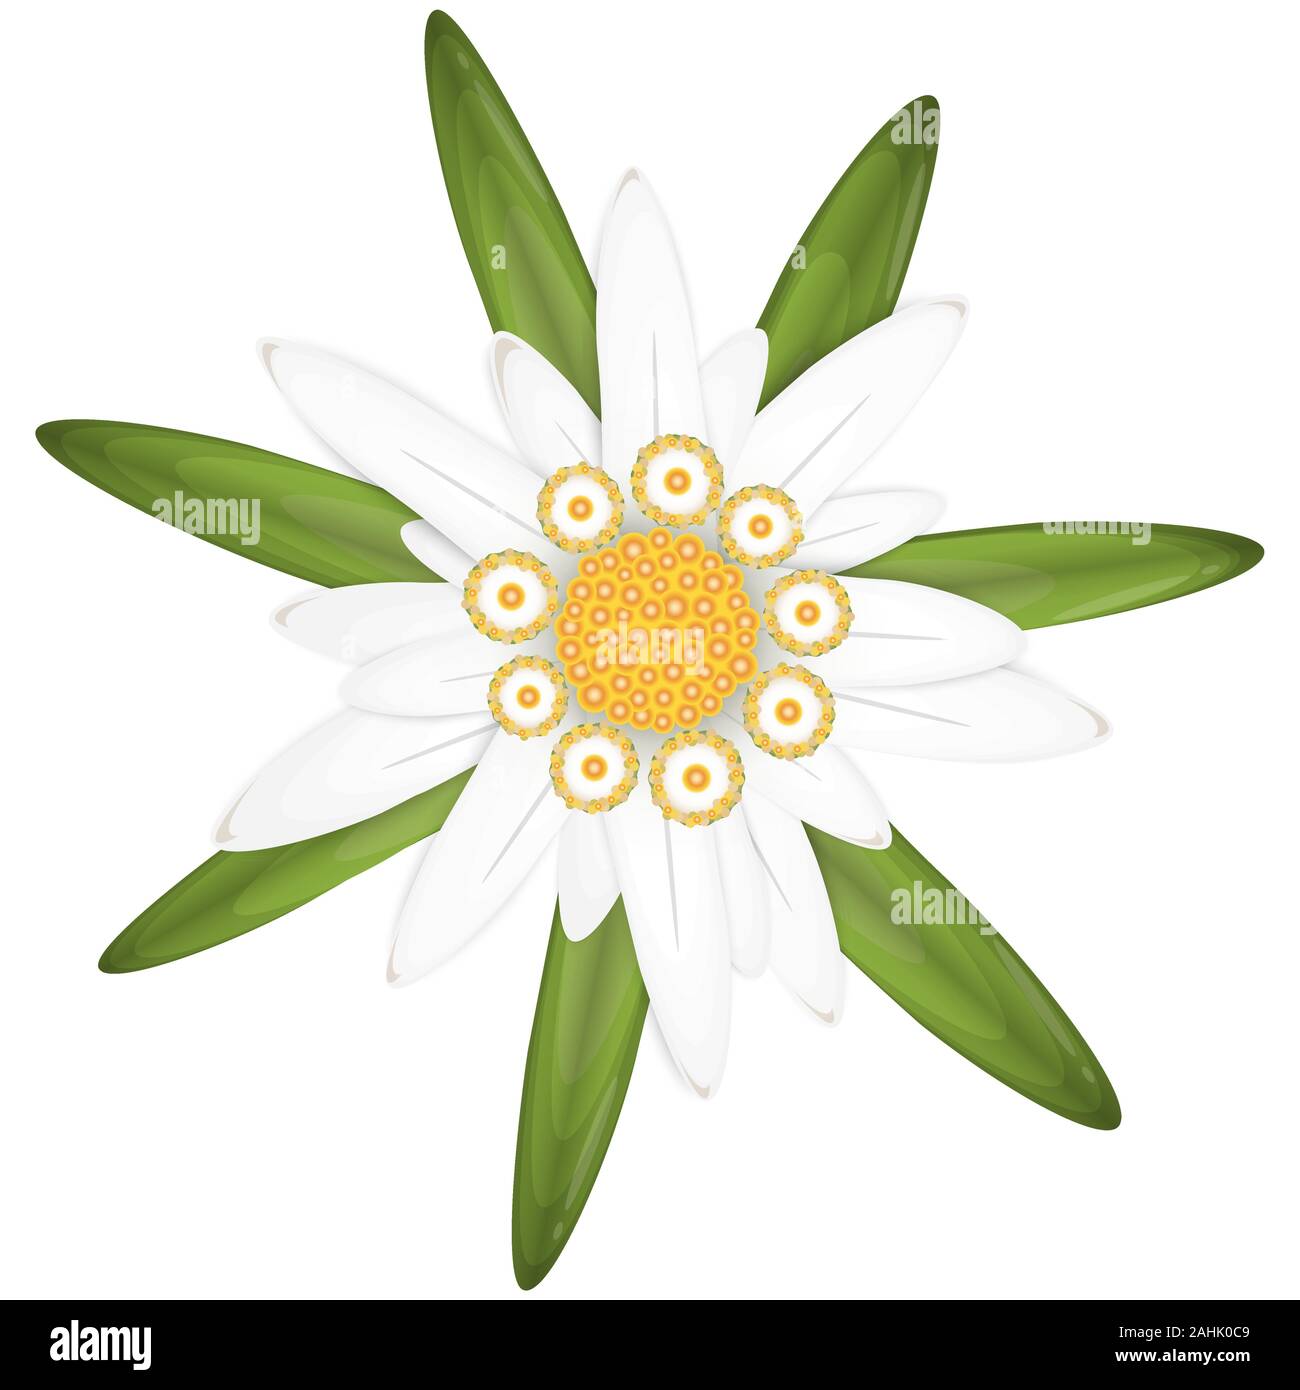 EPS 10 vector isolated edelweiss flower, symbol for german Oktoberfest and alps Stock Vector